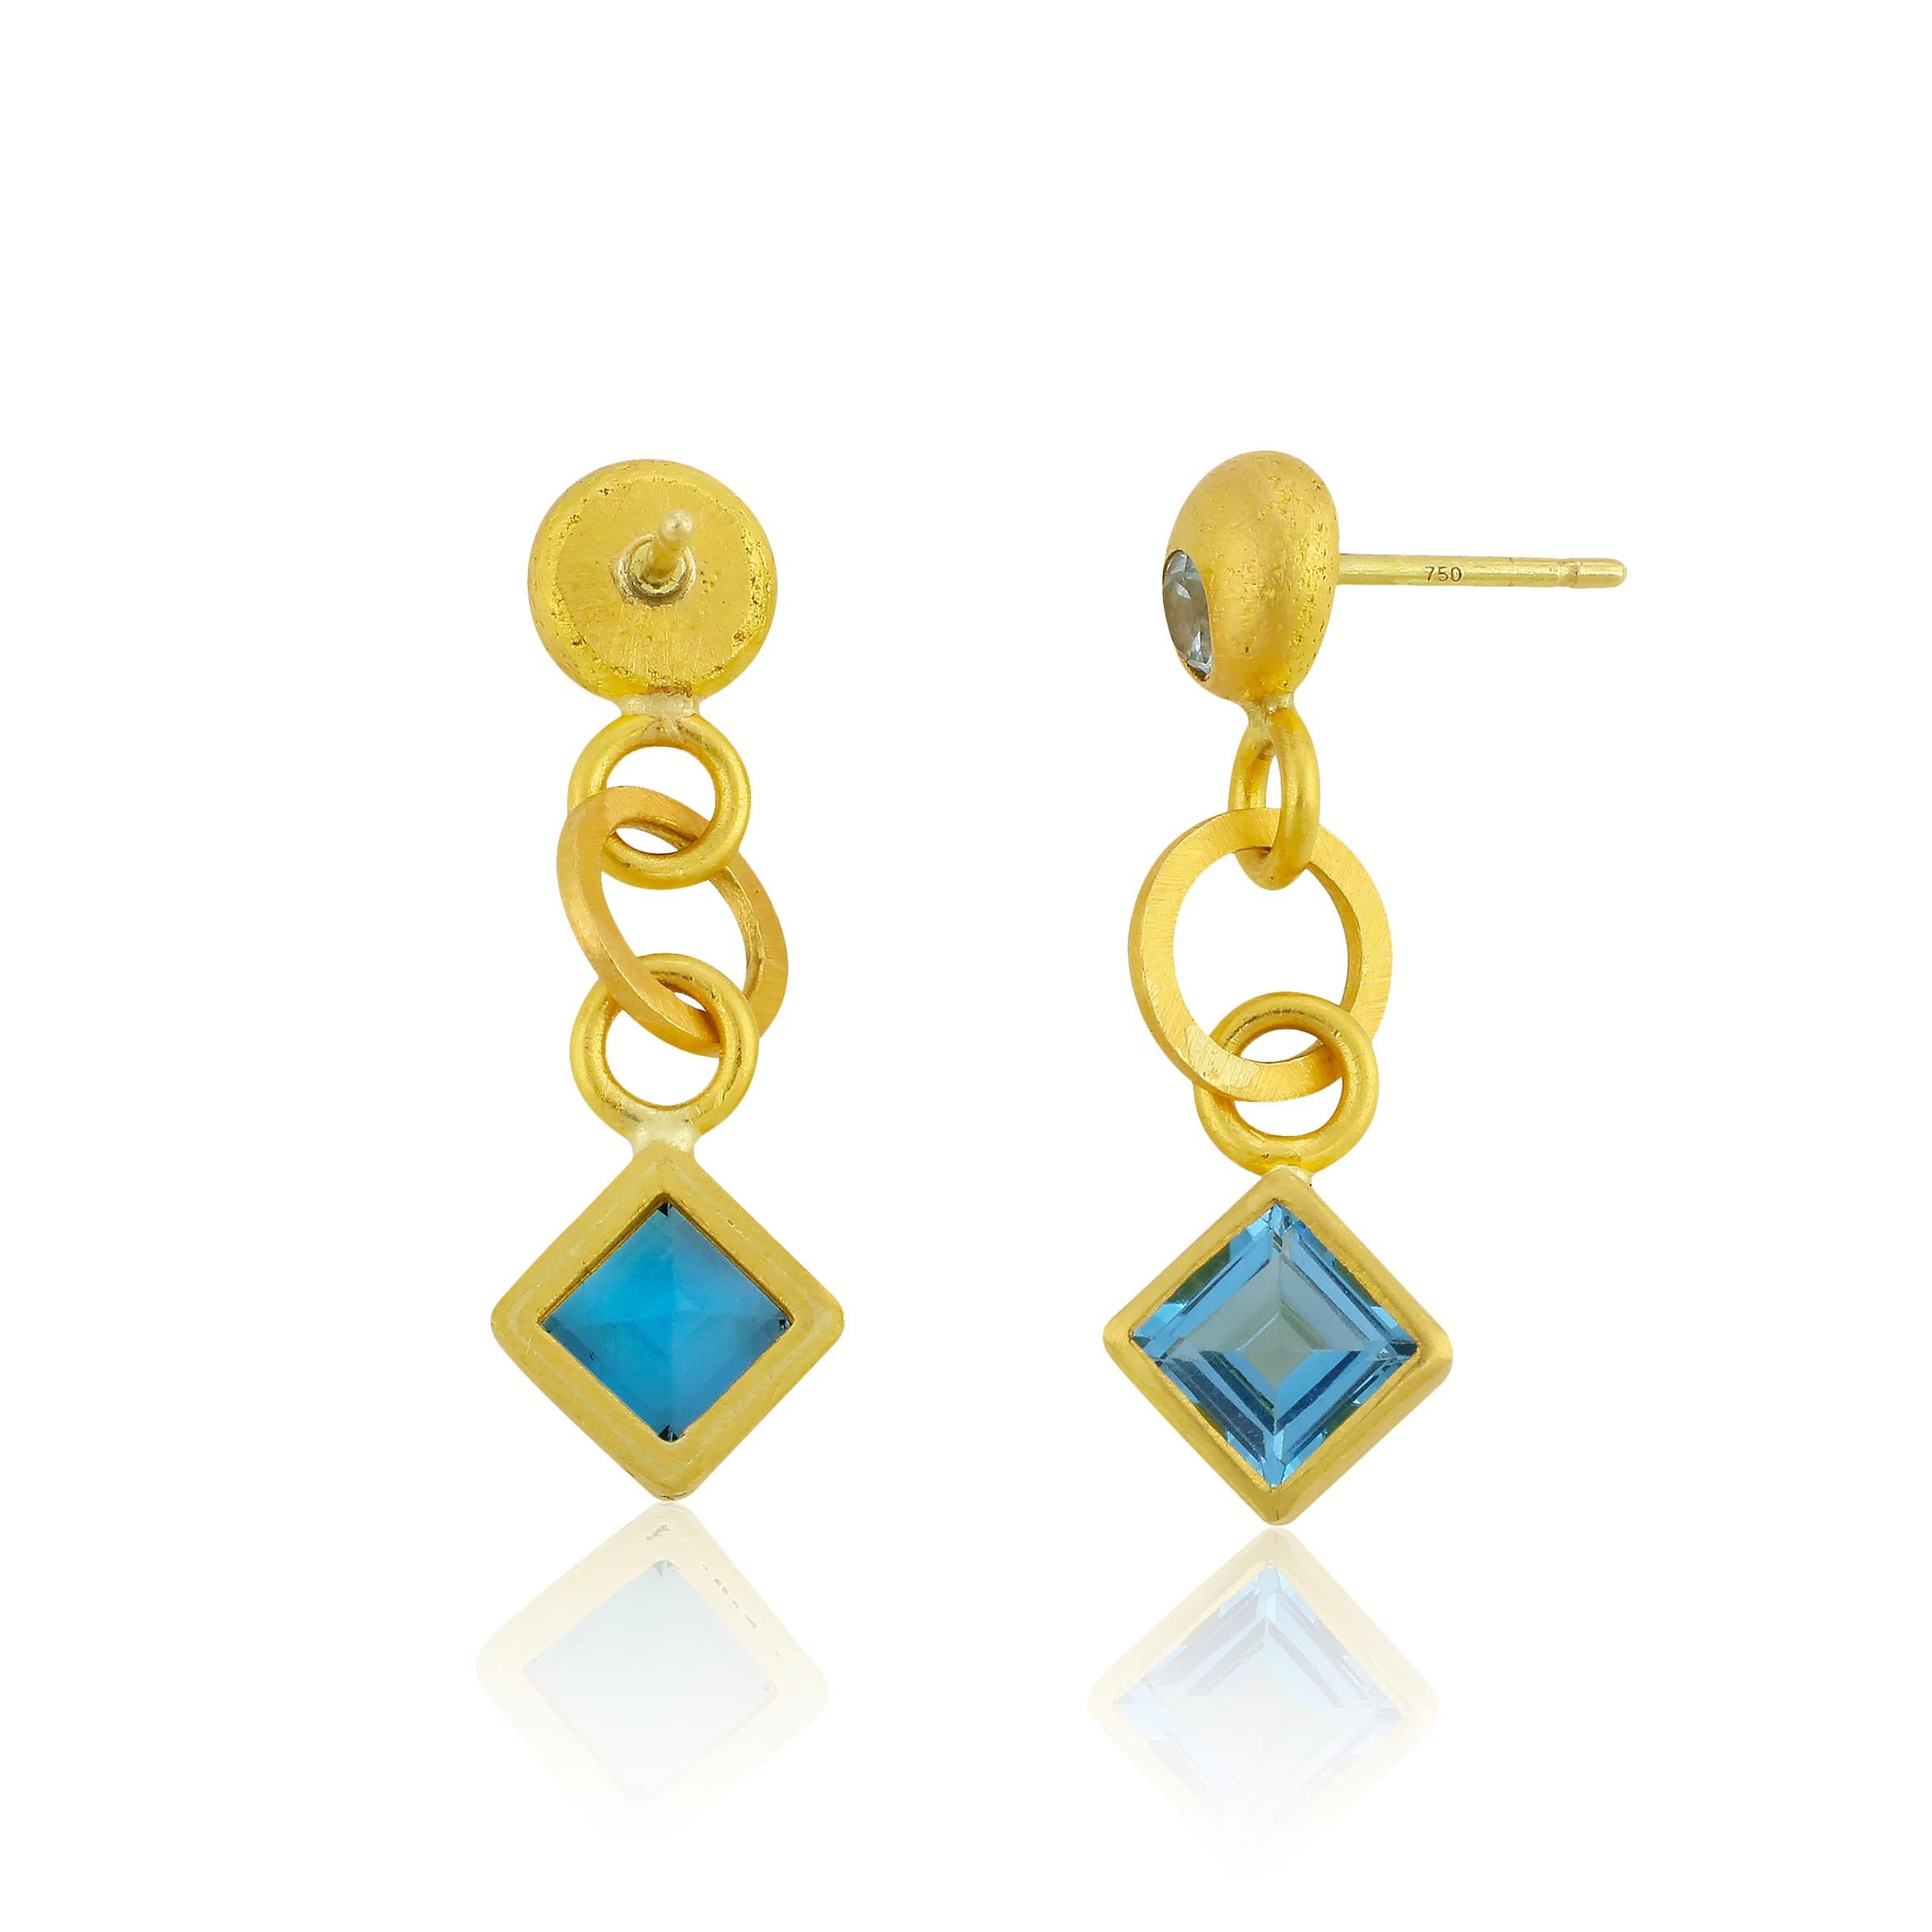 PHILIPPE SPENCER - 2.87 ct. Total Princess Cut London Blue Topas, und .35 Ct. Total Round Aquamarine Dangling Statement Earrings. Blue Topaz in backless reinem 22K Gold mit soliden 20K Gold Verbindung Links & Features gesetzt. 18K Post Back &